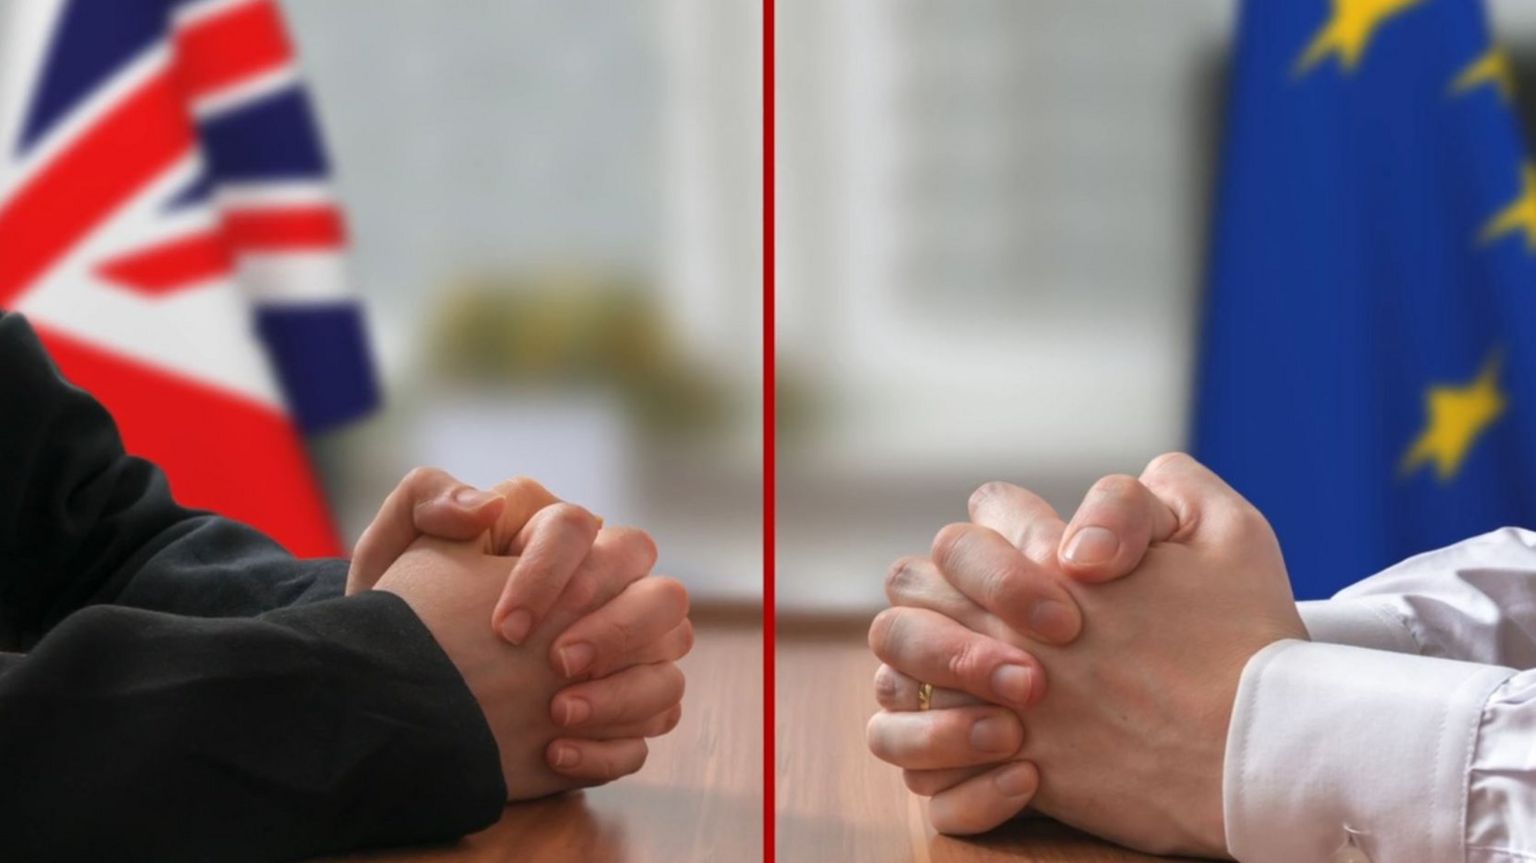 Two men's hands across a negotiating table, in front of UK and EU flags